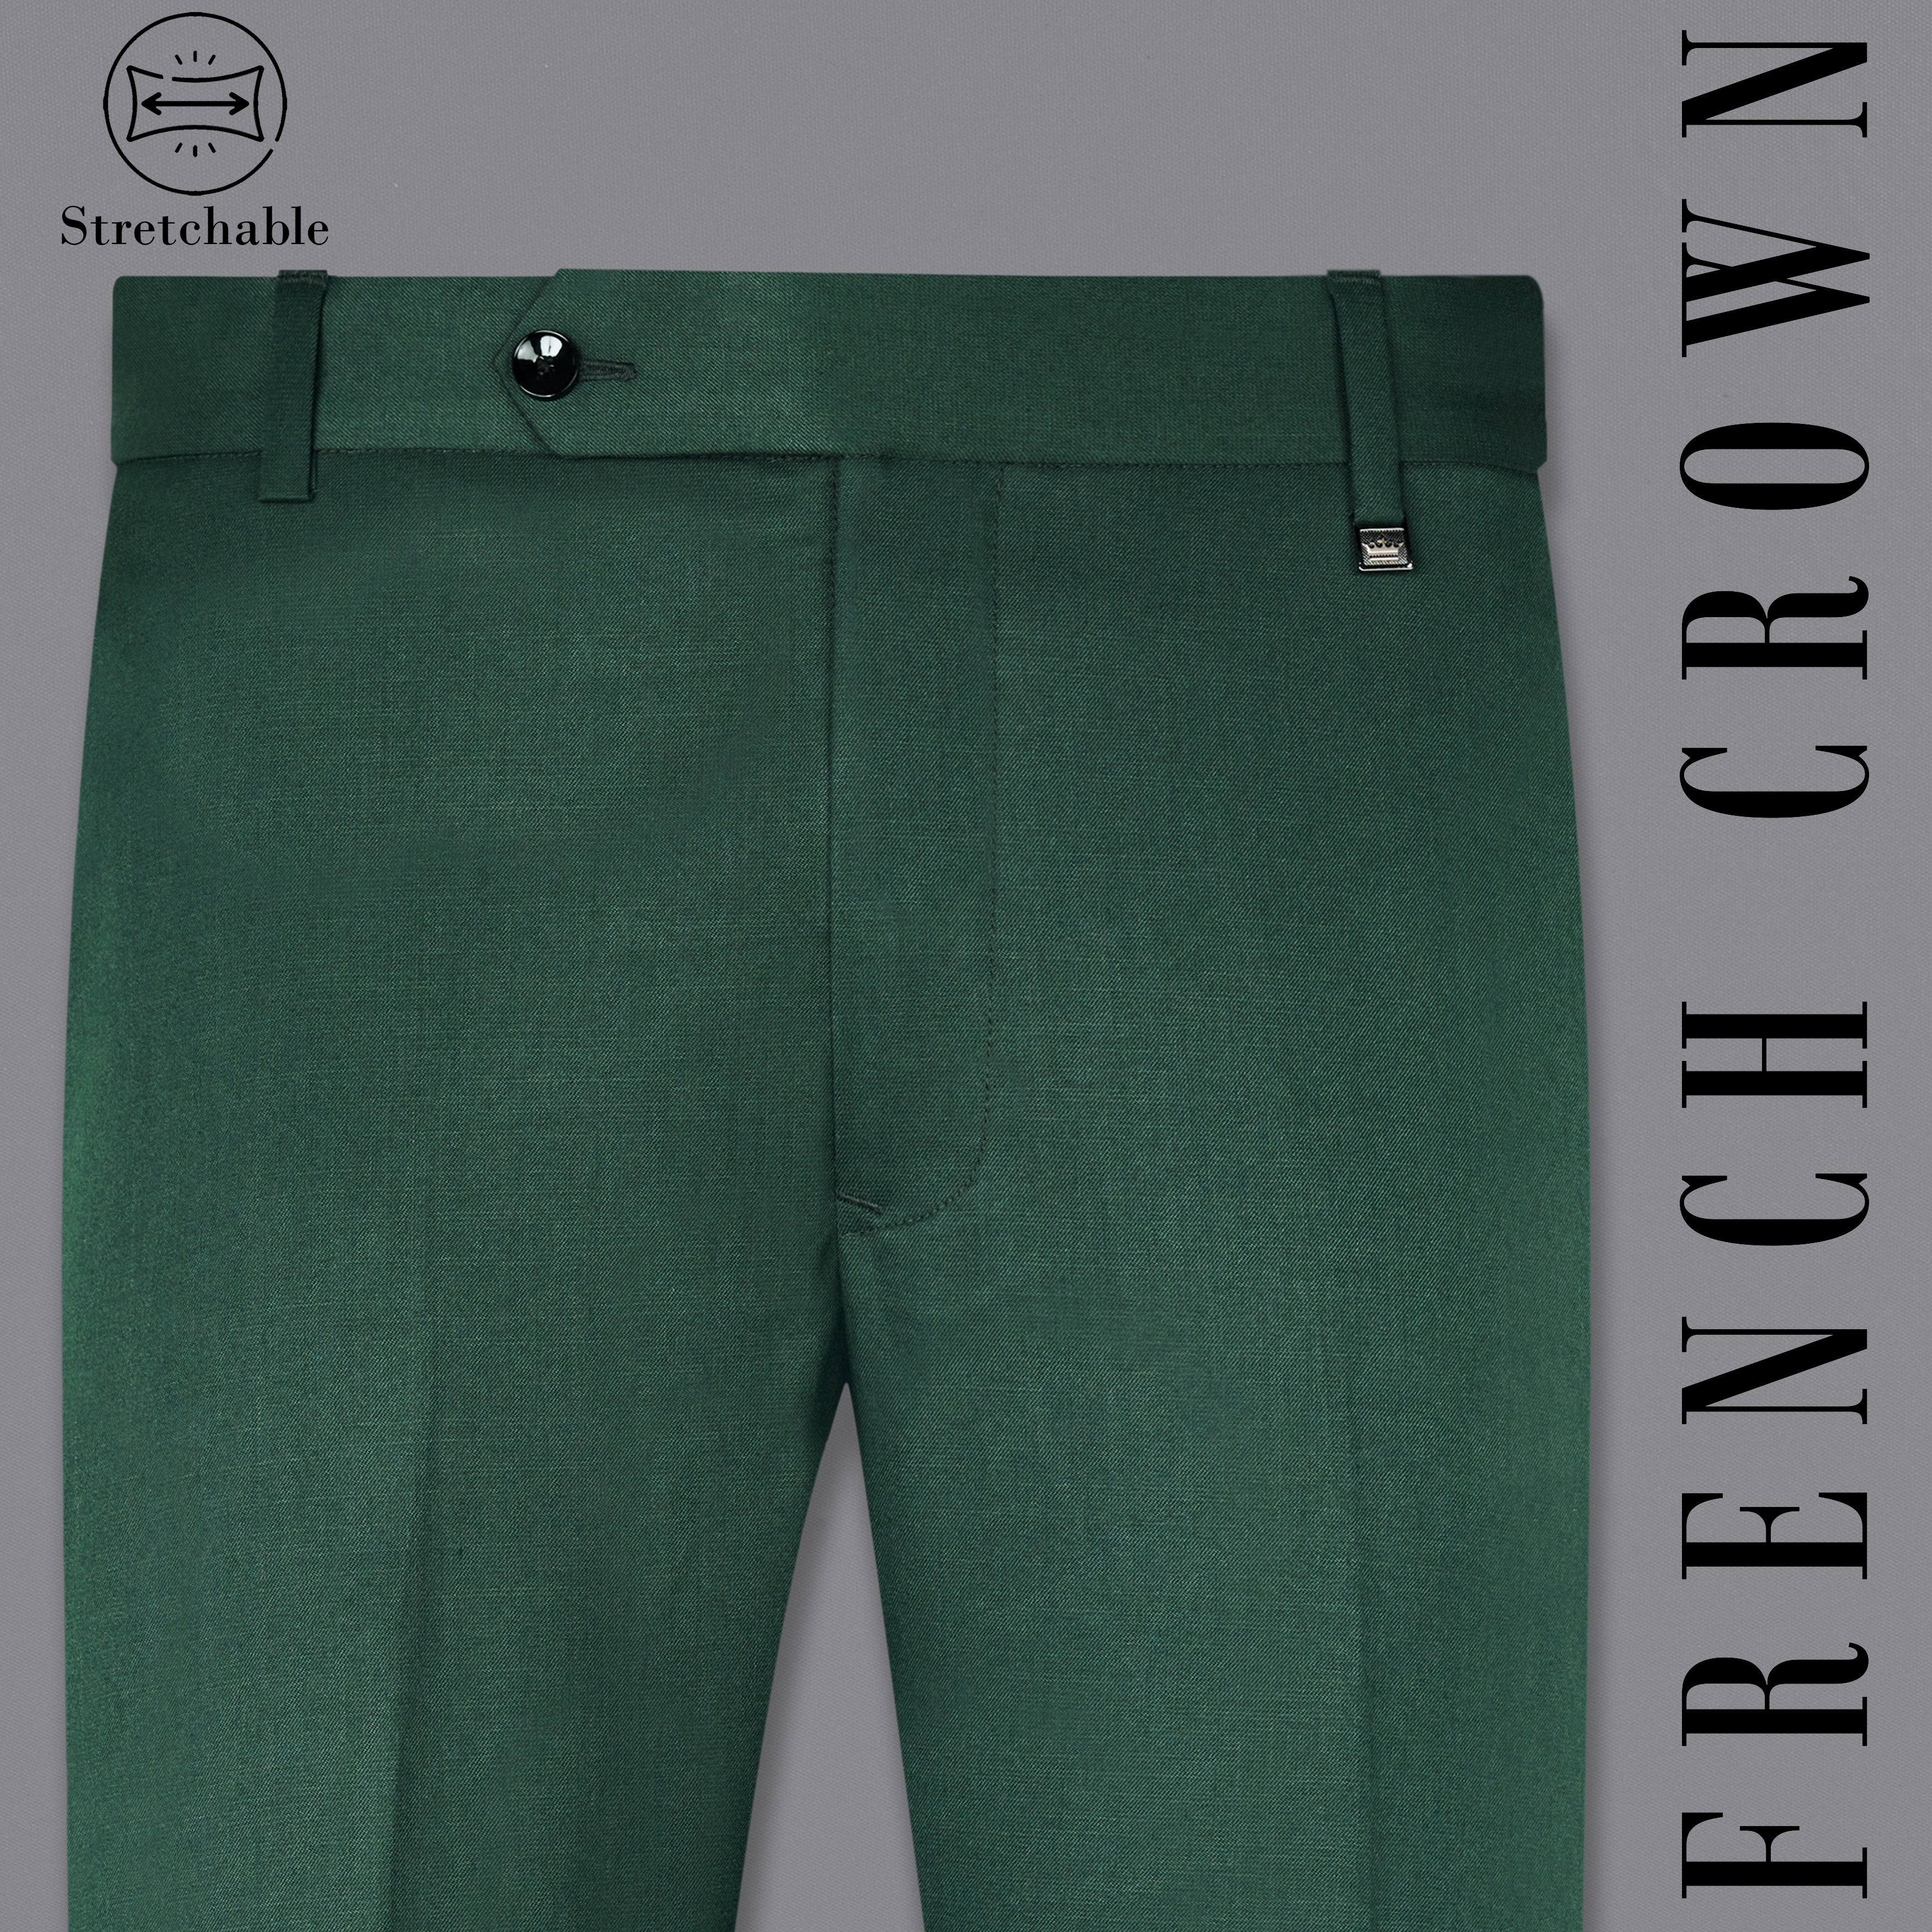 Men's Formal Trousers & Hight Waist Pants in wool on sale | FASHIOLA INDIA